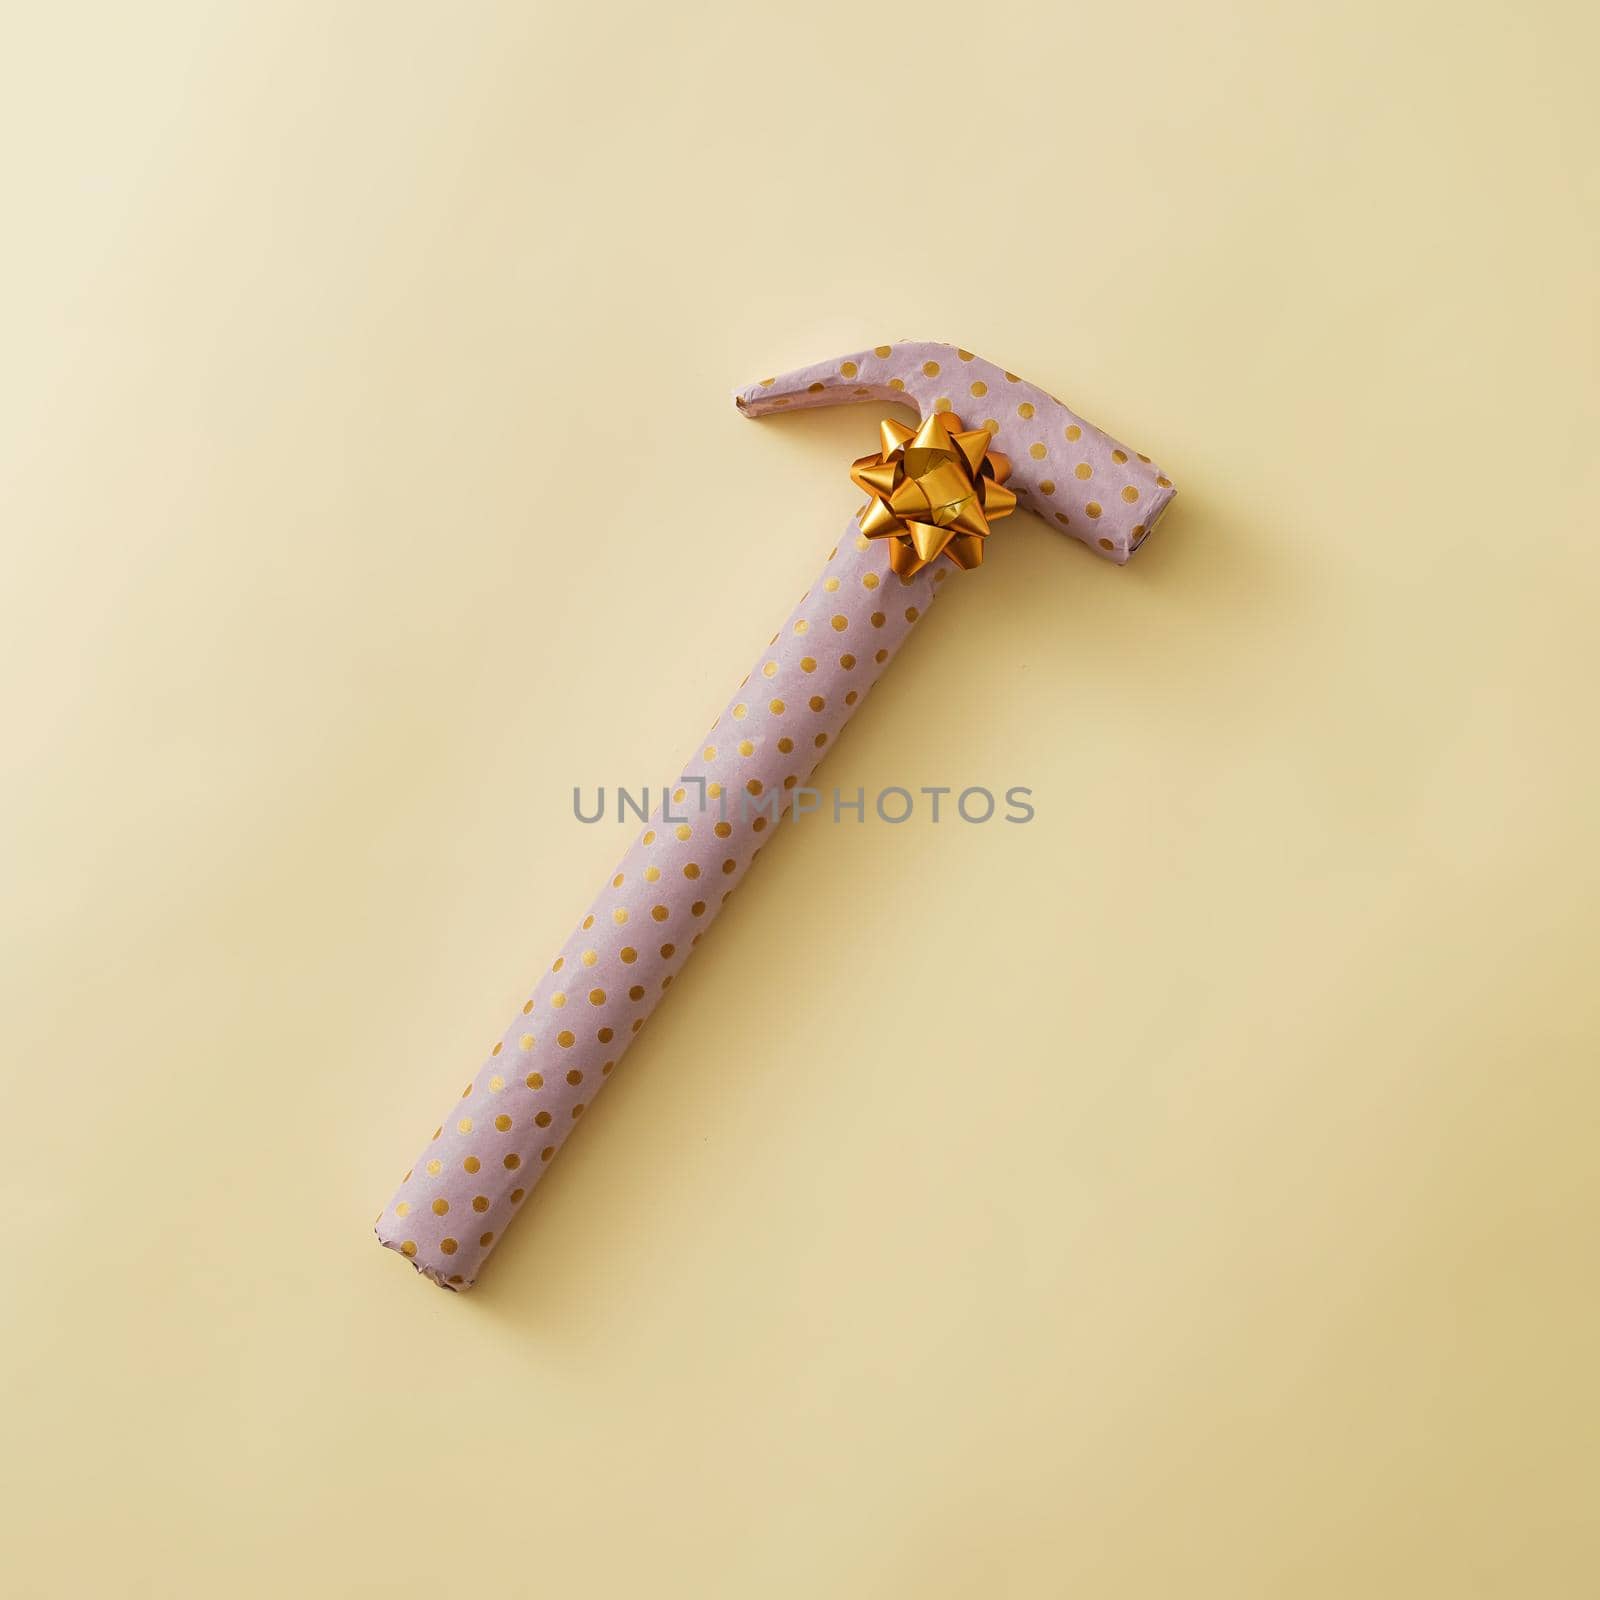 Gift wrapped hammer in yellow polka dot paper decorated with a gold ribbon bow over a yellow background with copy space